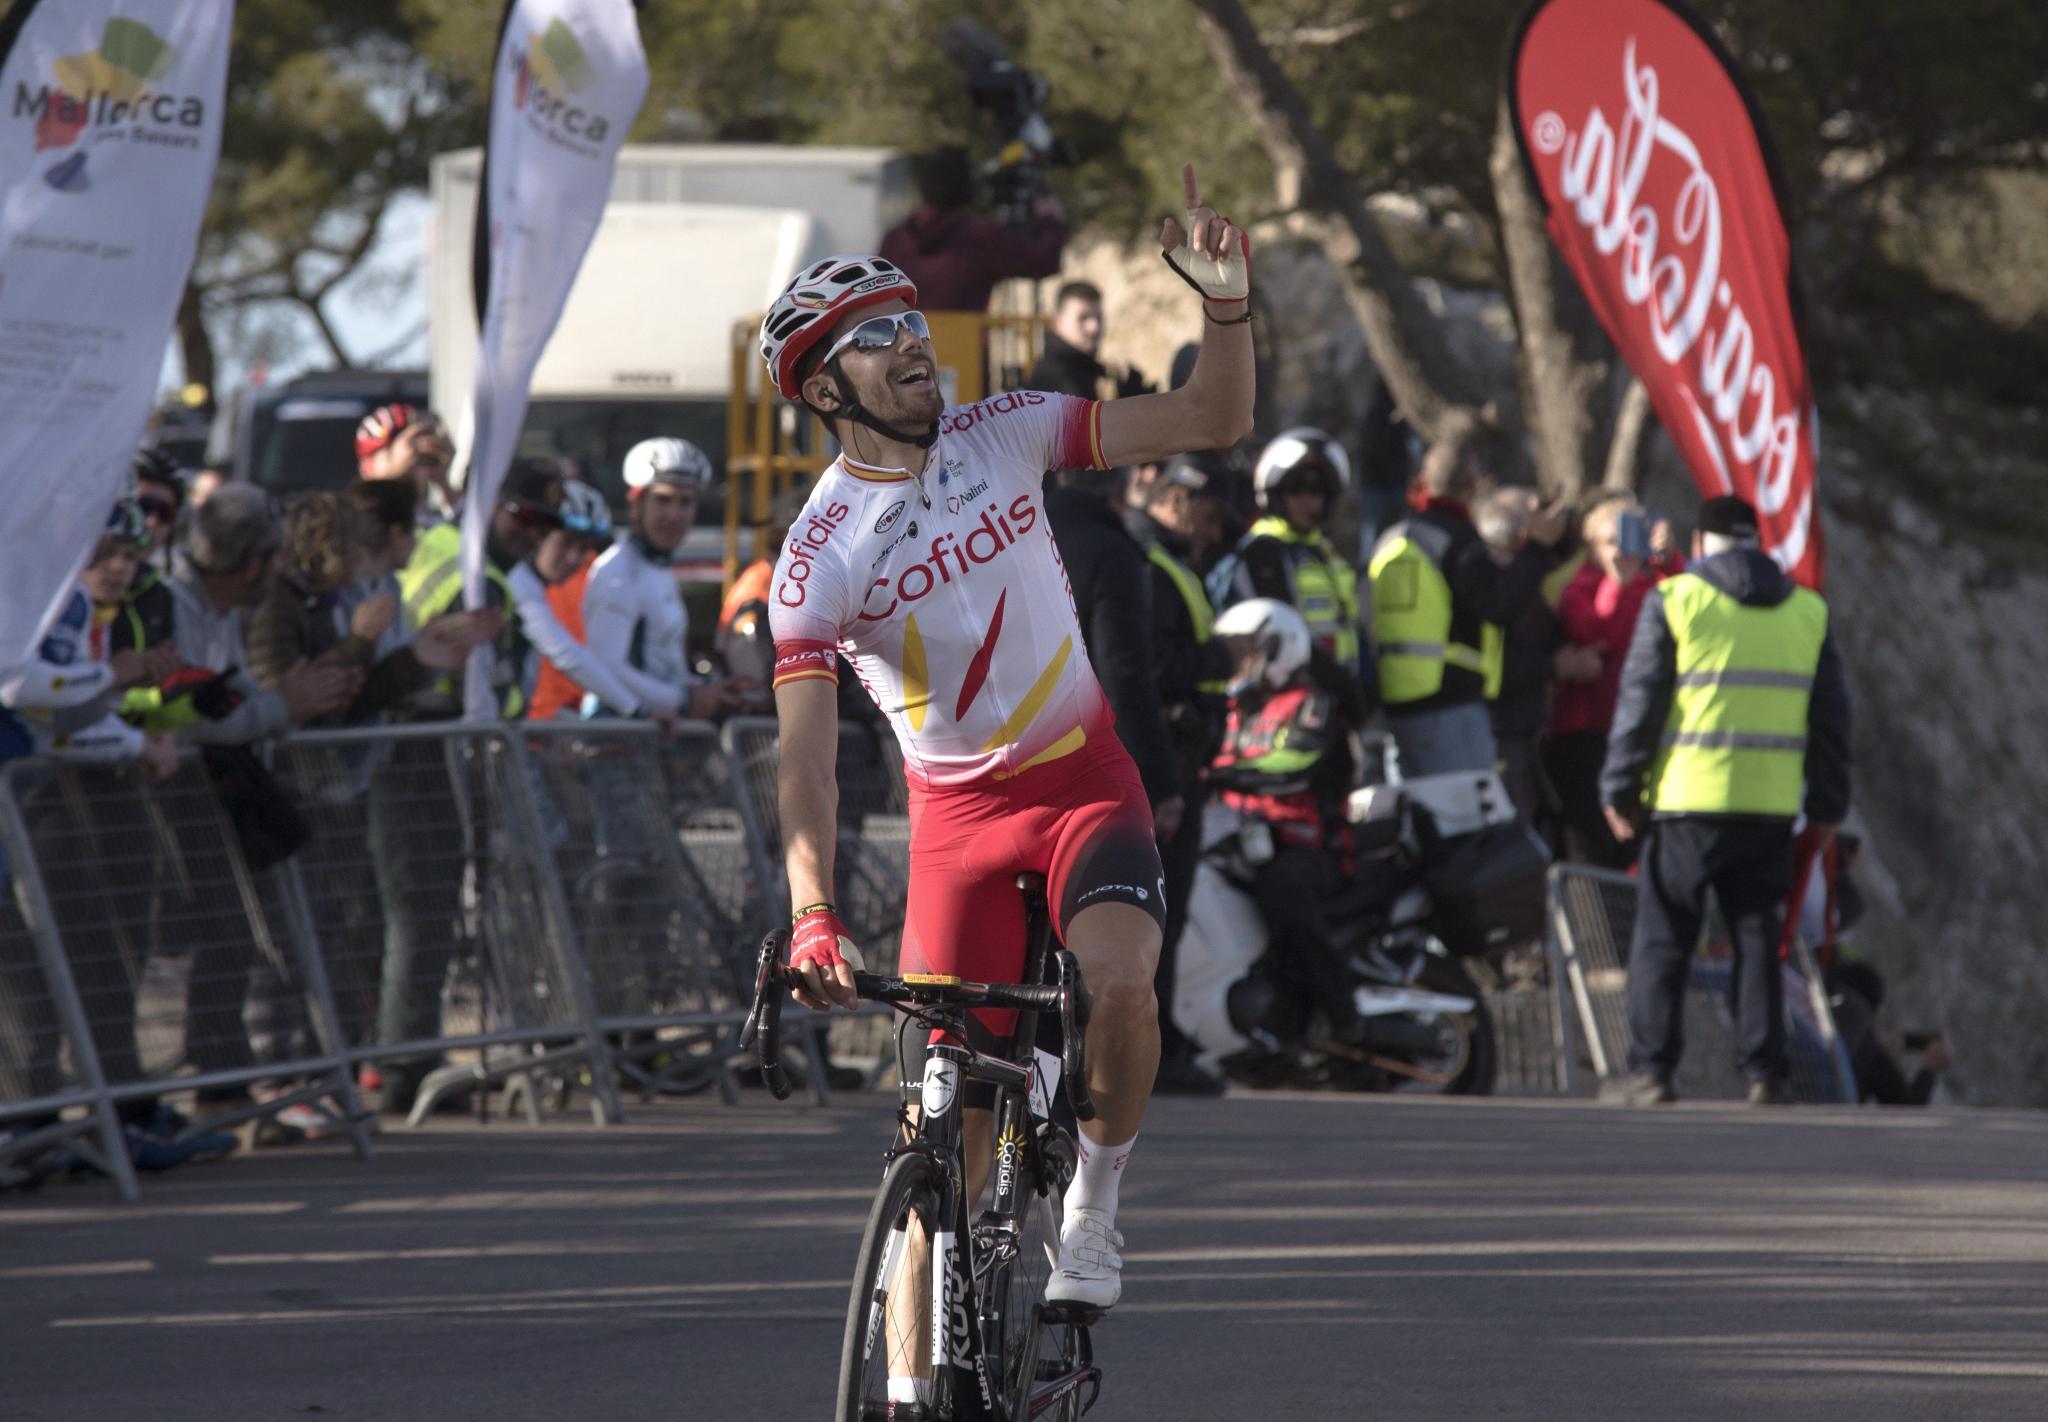 Vuelta Mallorca Begins Today With 4 Routes Over 4 Days